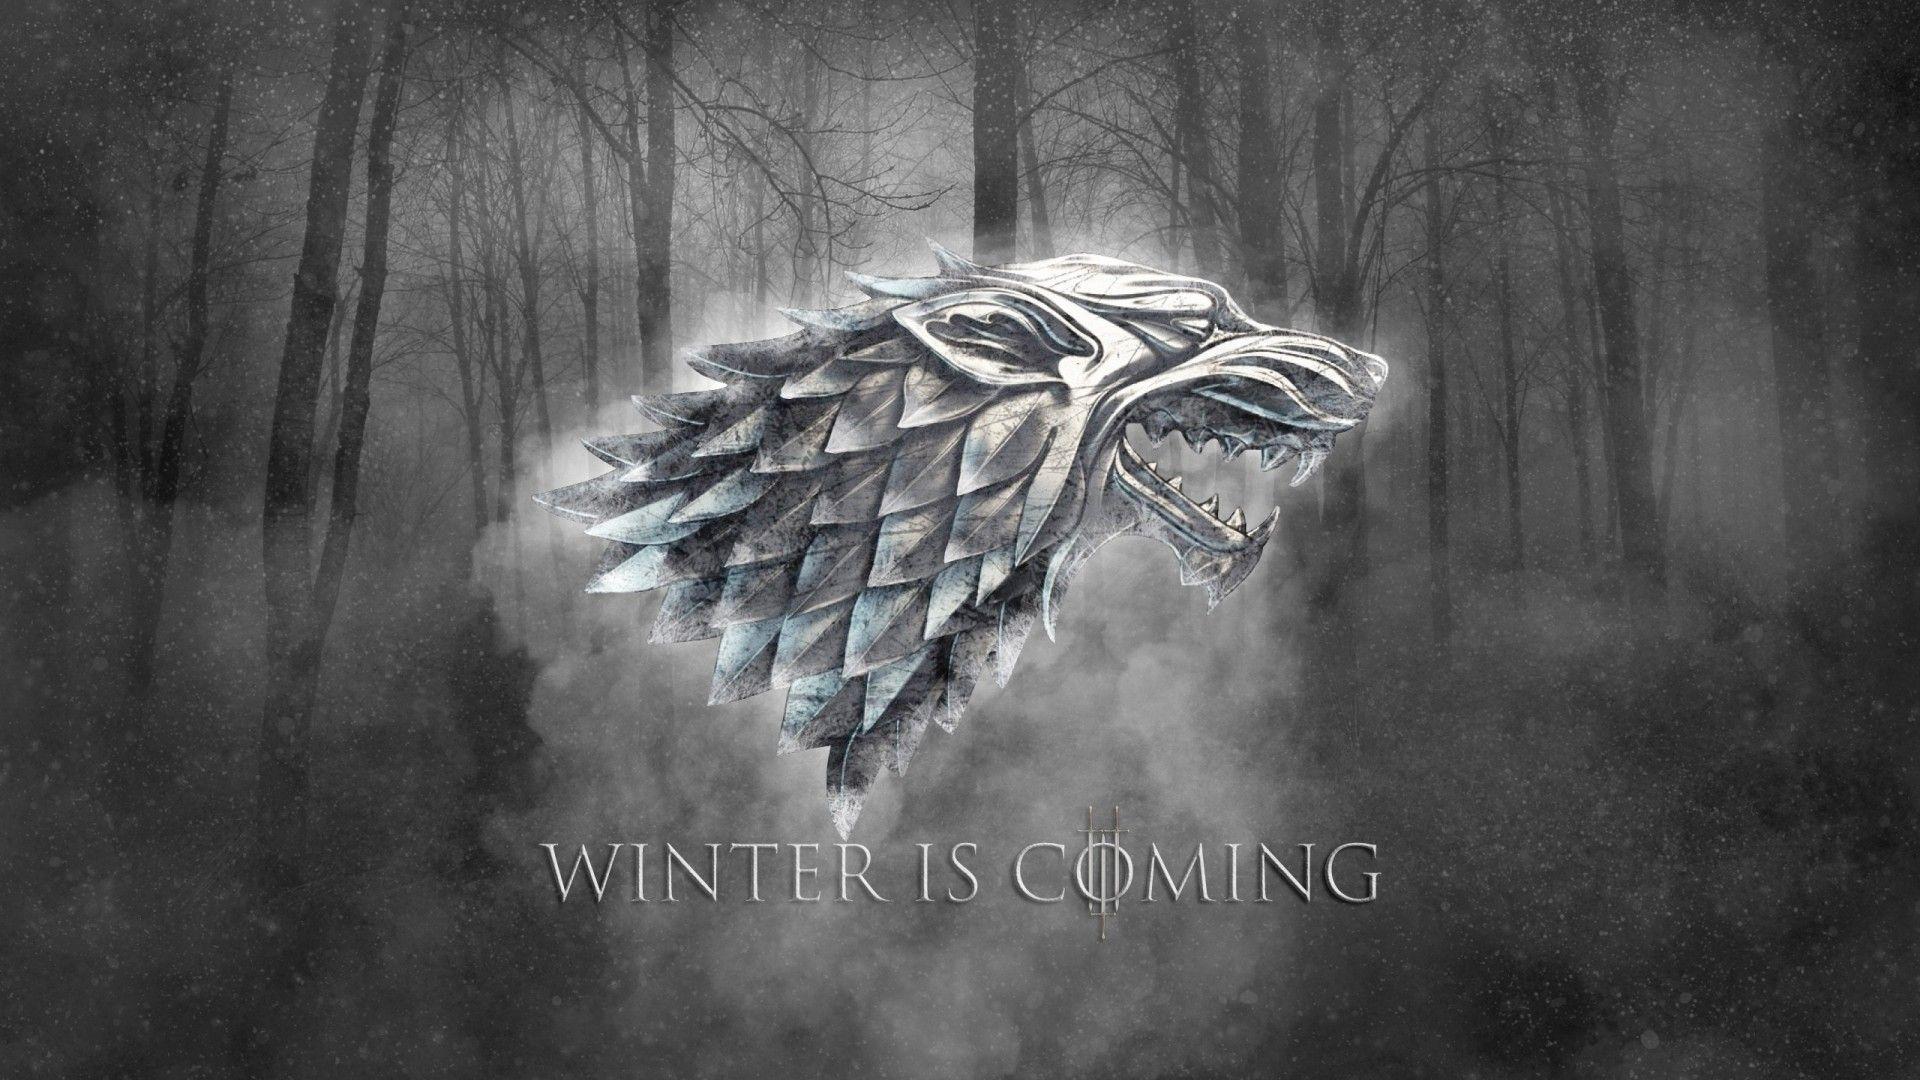 House Stark Wallpaper (Picture)